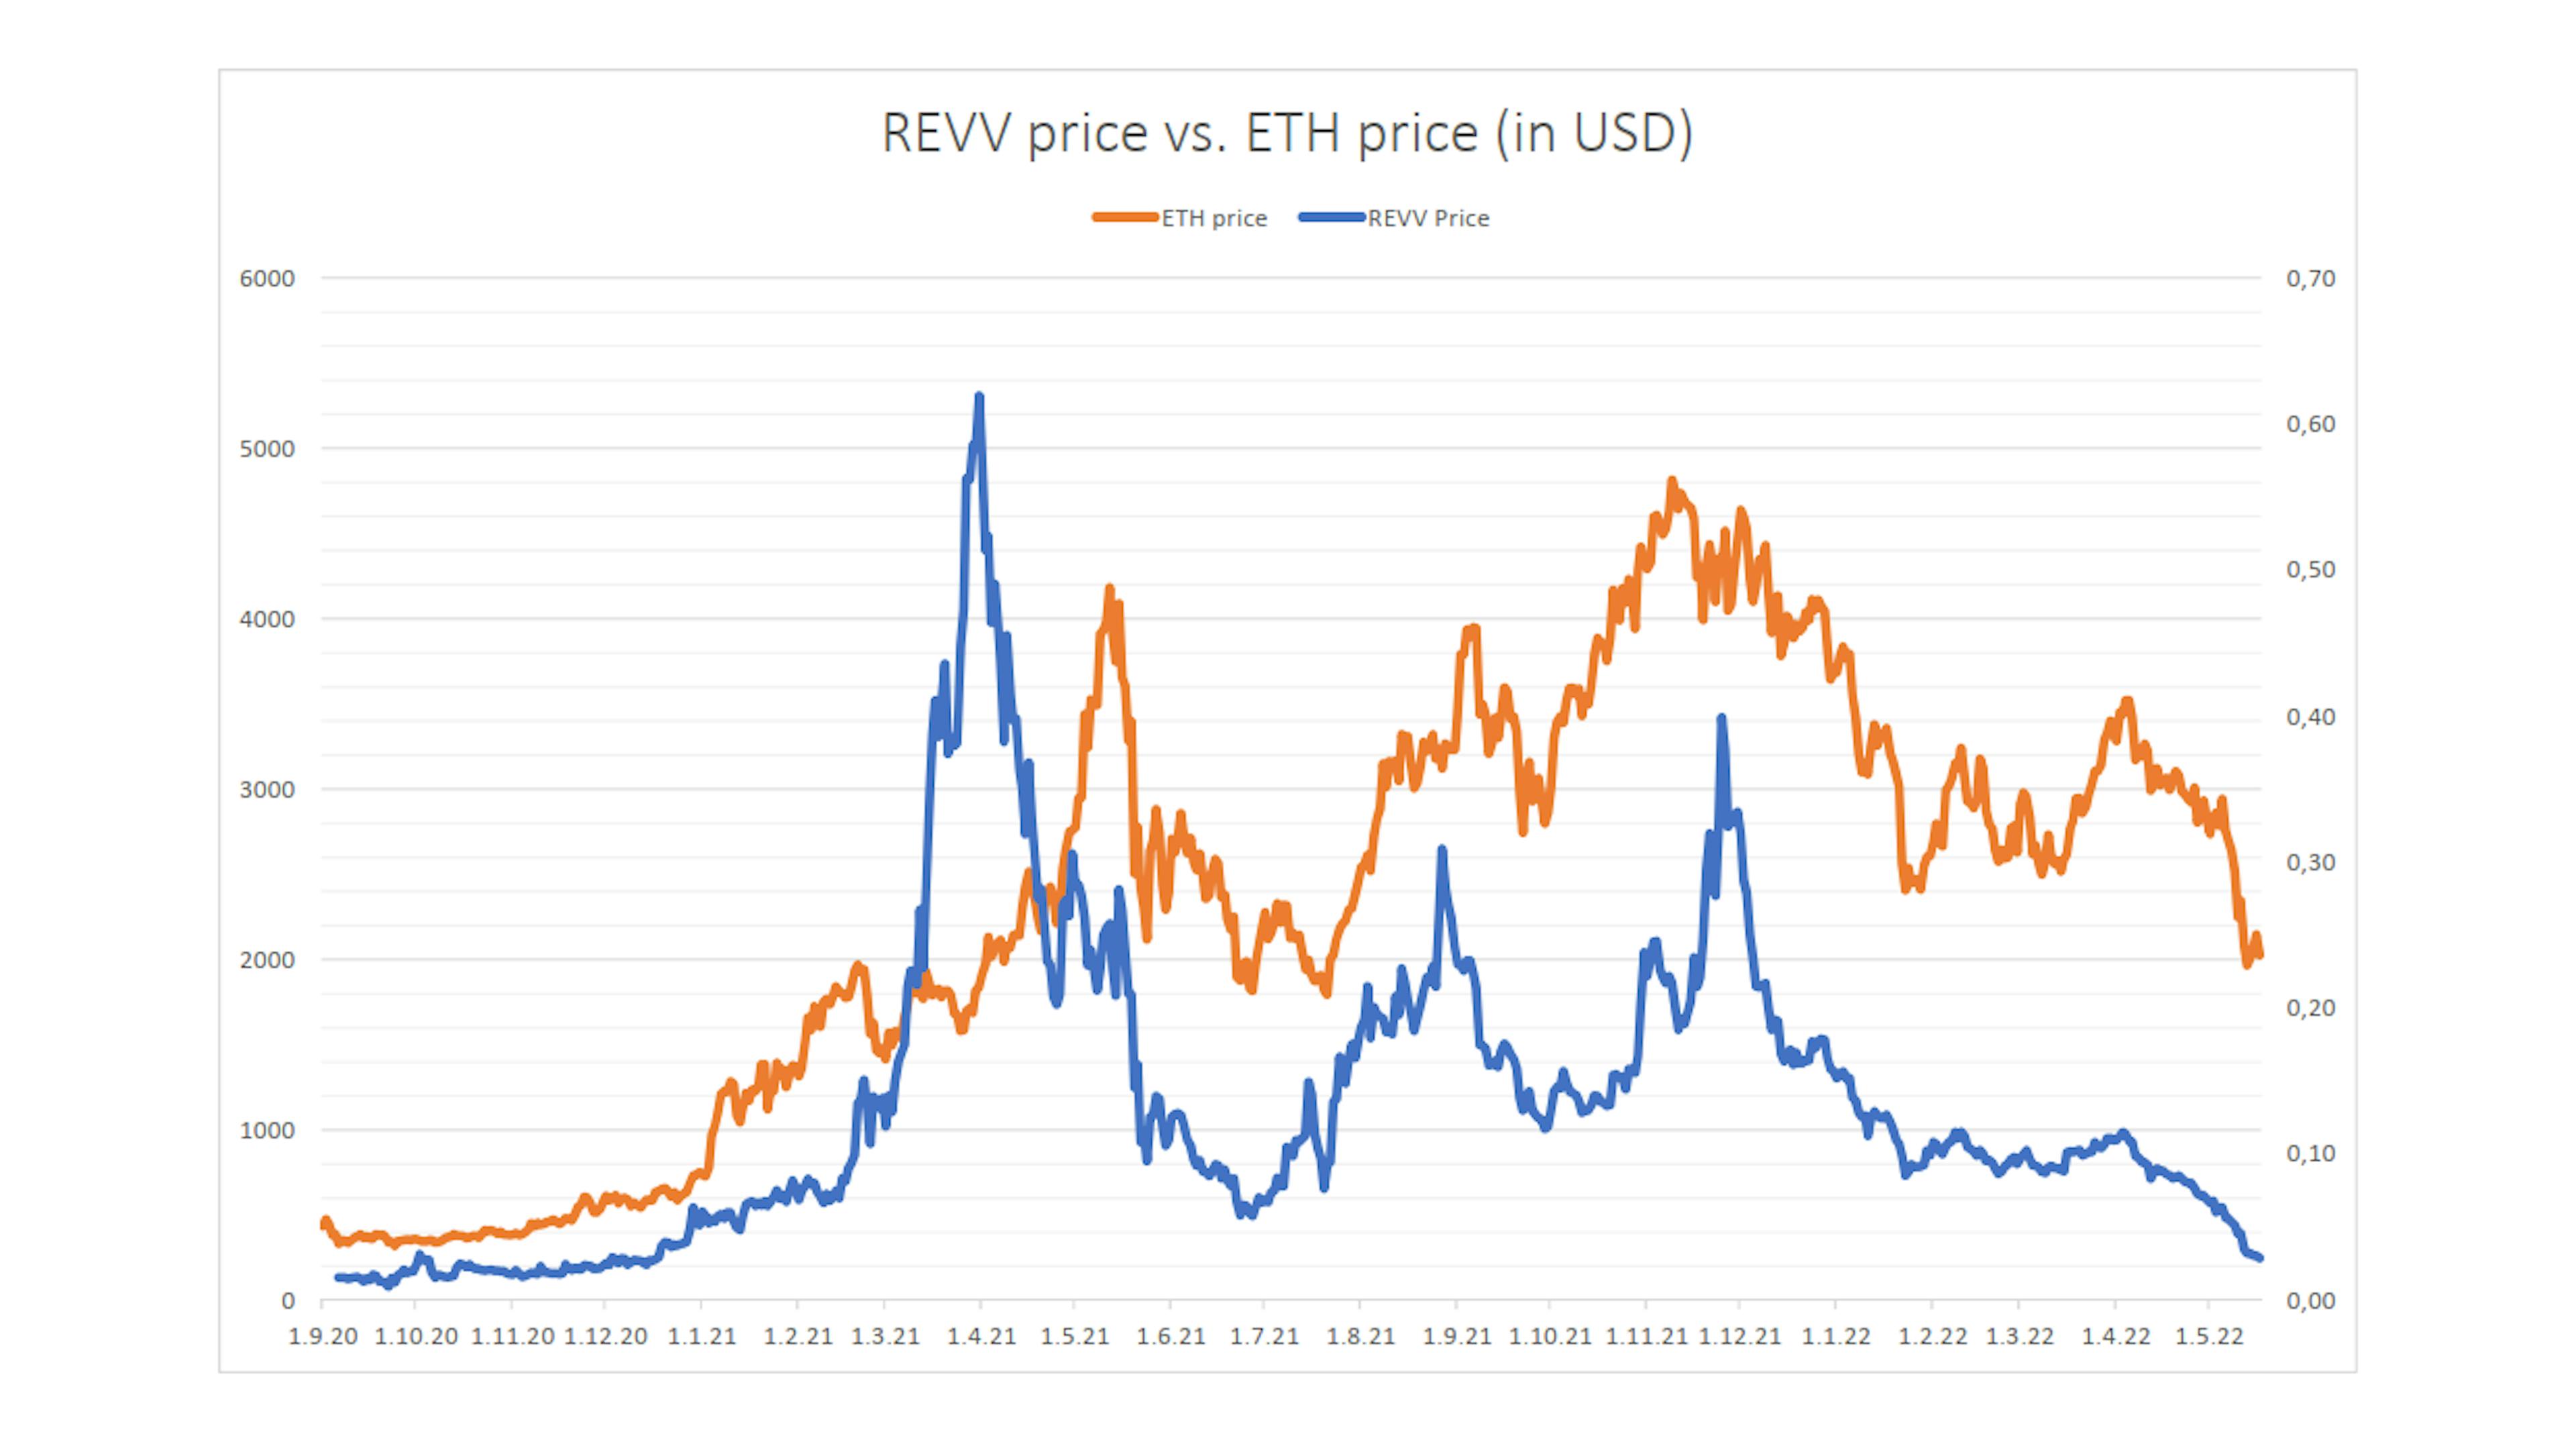 Fig. 1. Dynamics of price movement for ETH and REVV. The scale is different for each cryptocurrency because the purpose is to show how the price moved.